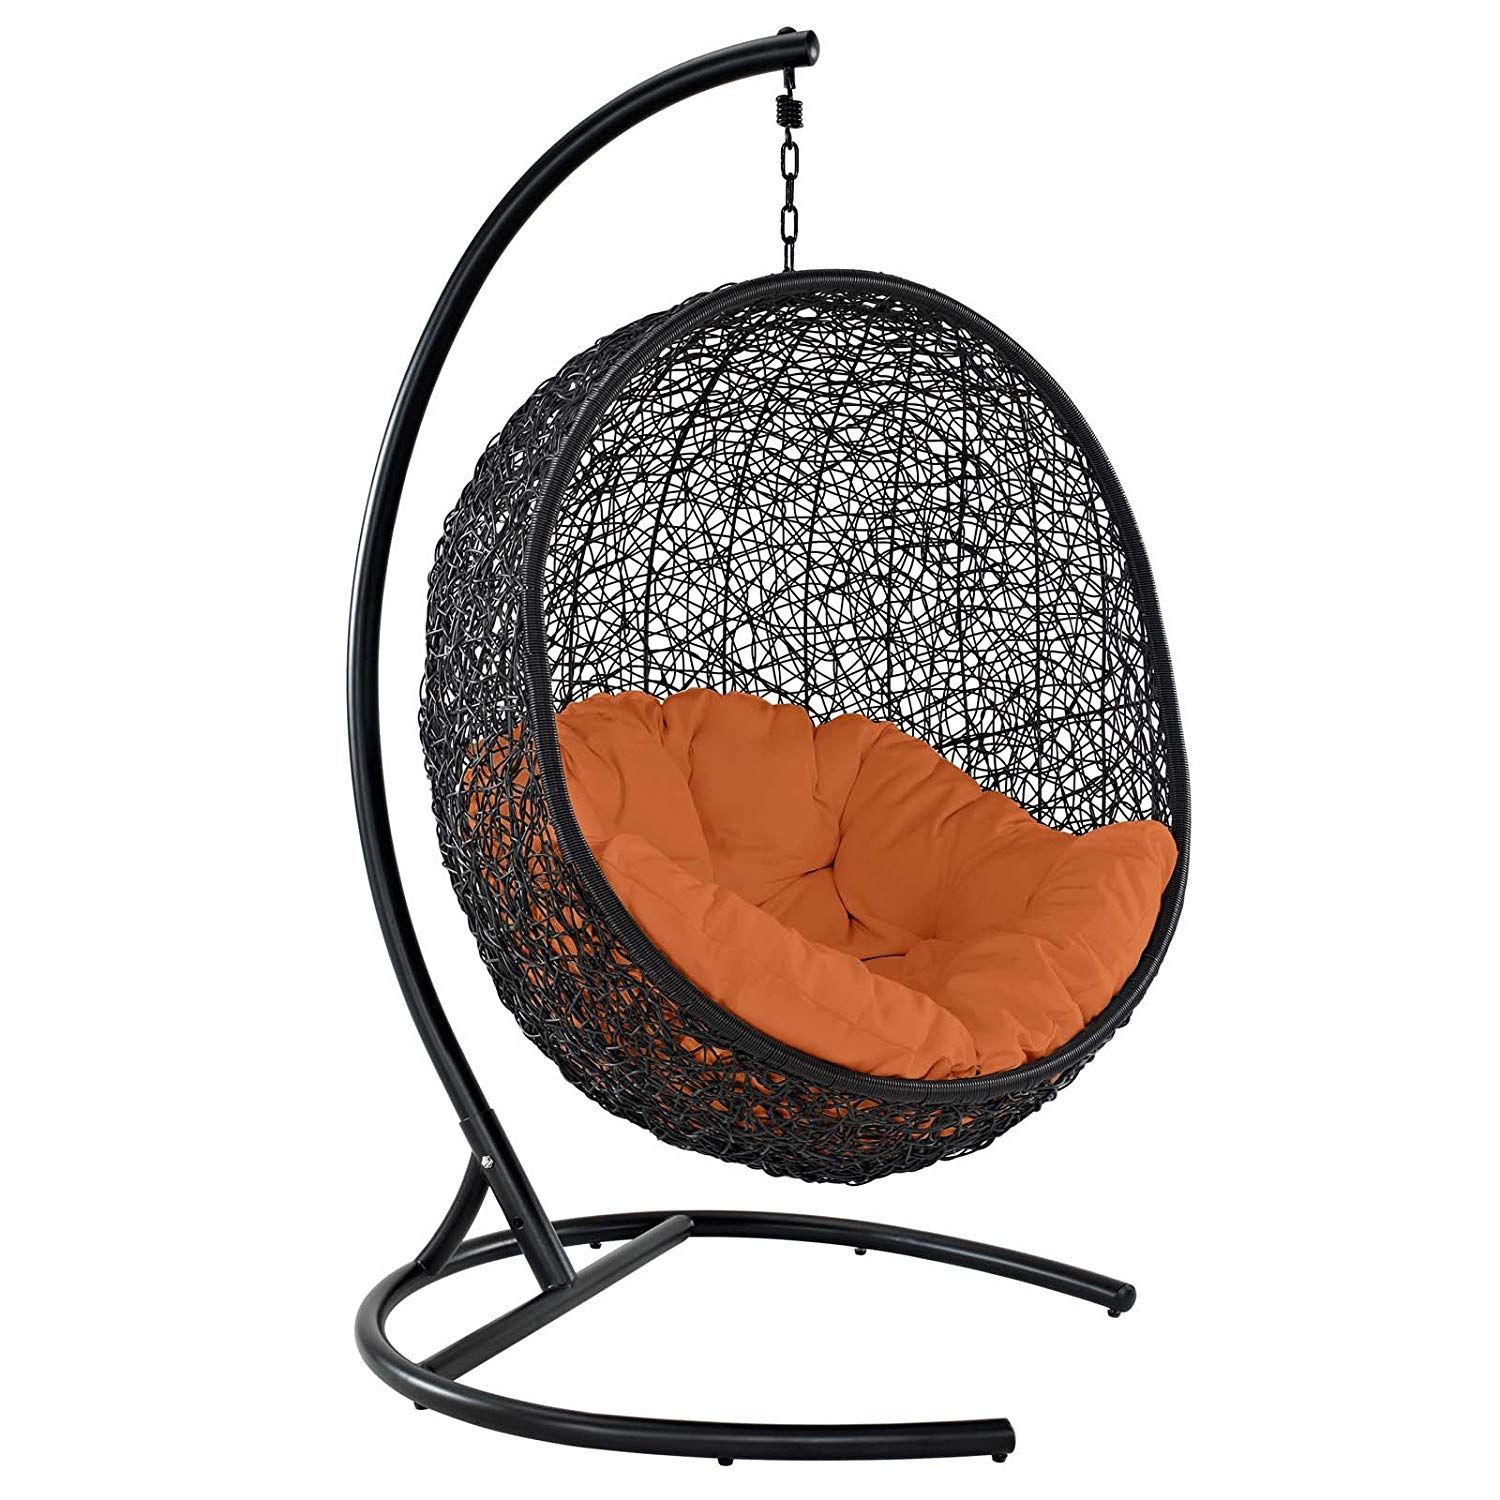 12 Best Hanging Egg Chairs To Buy In 2020 – Outdoor & Indoor Pertaining To Outdoor Wicker Plastic Tear Porch Swings With Stand (Photo 7 of 25)